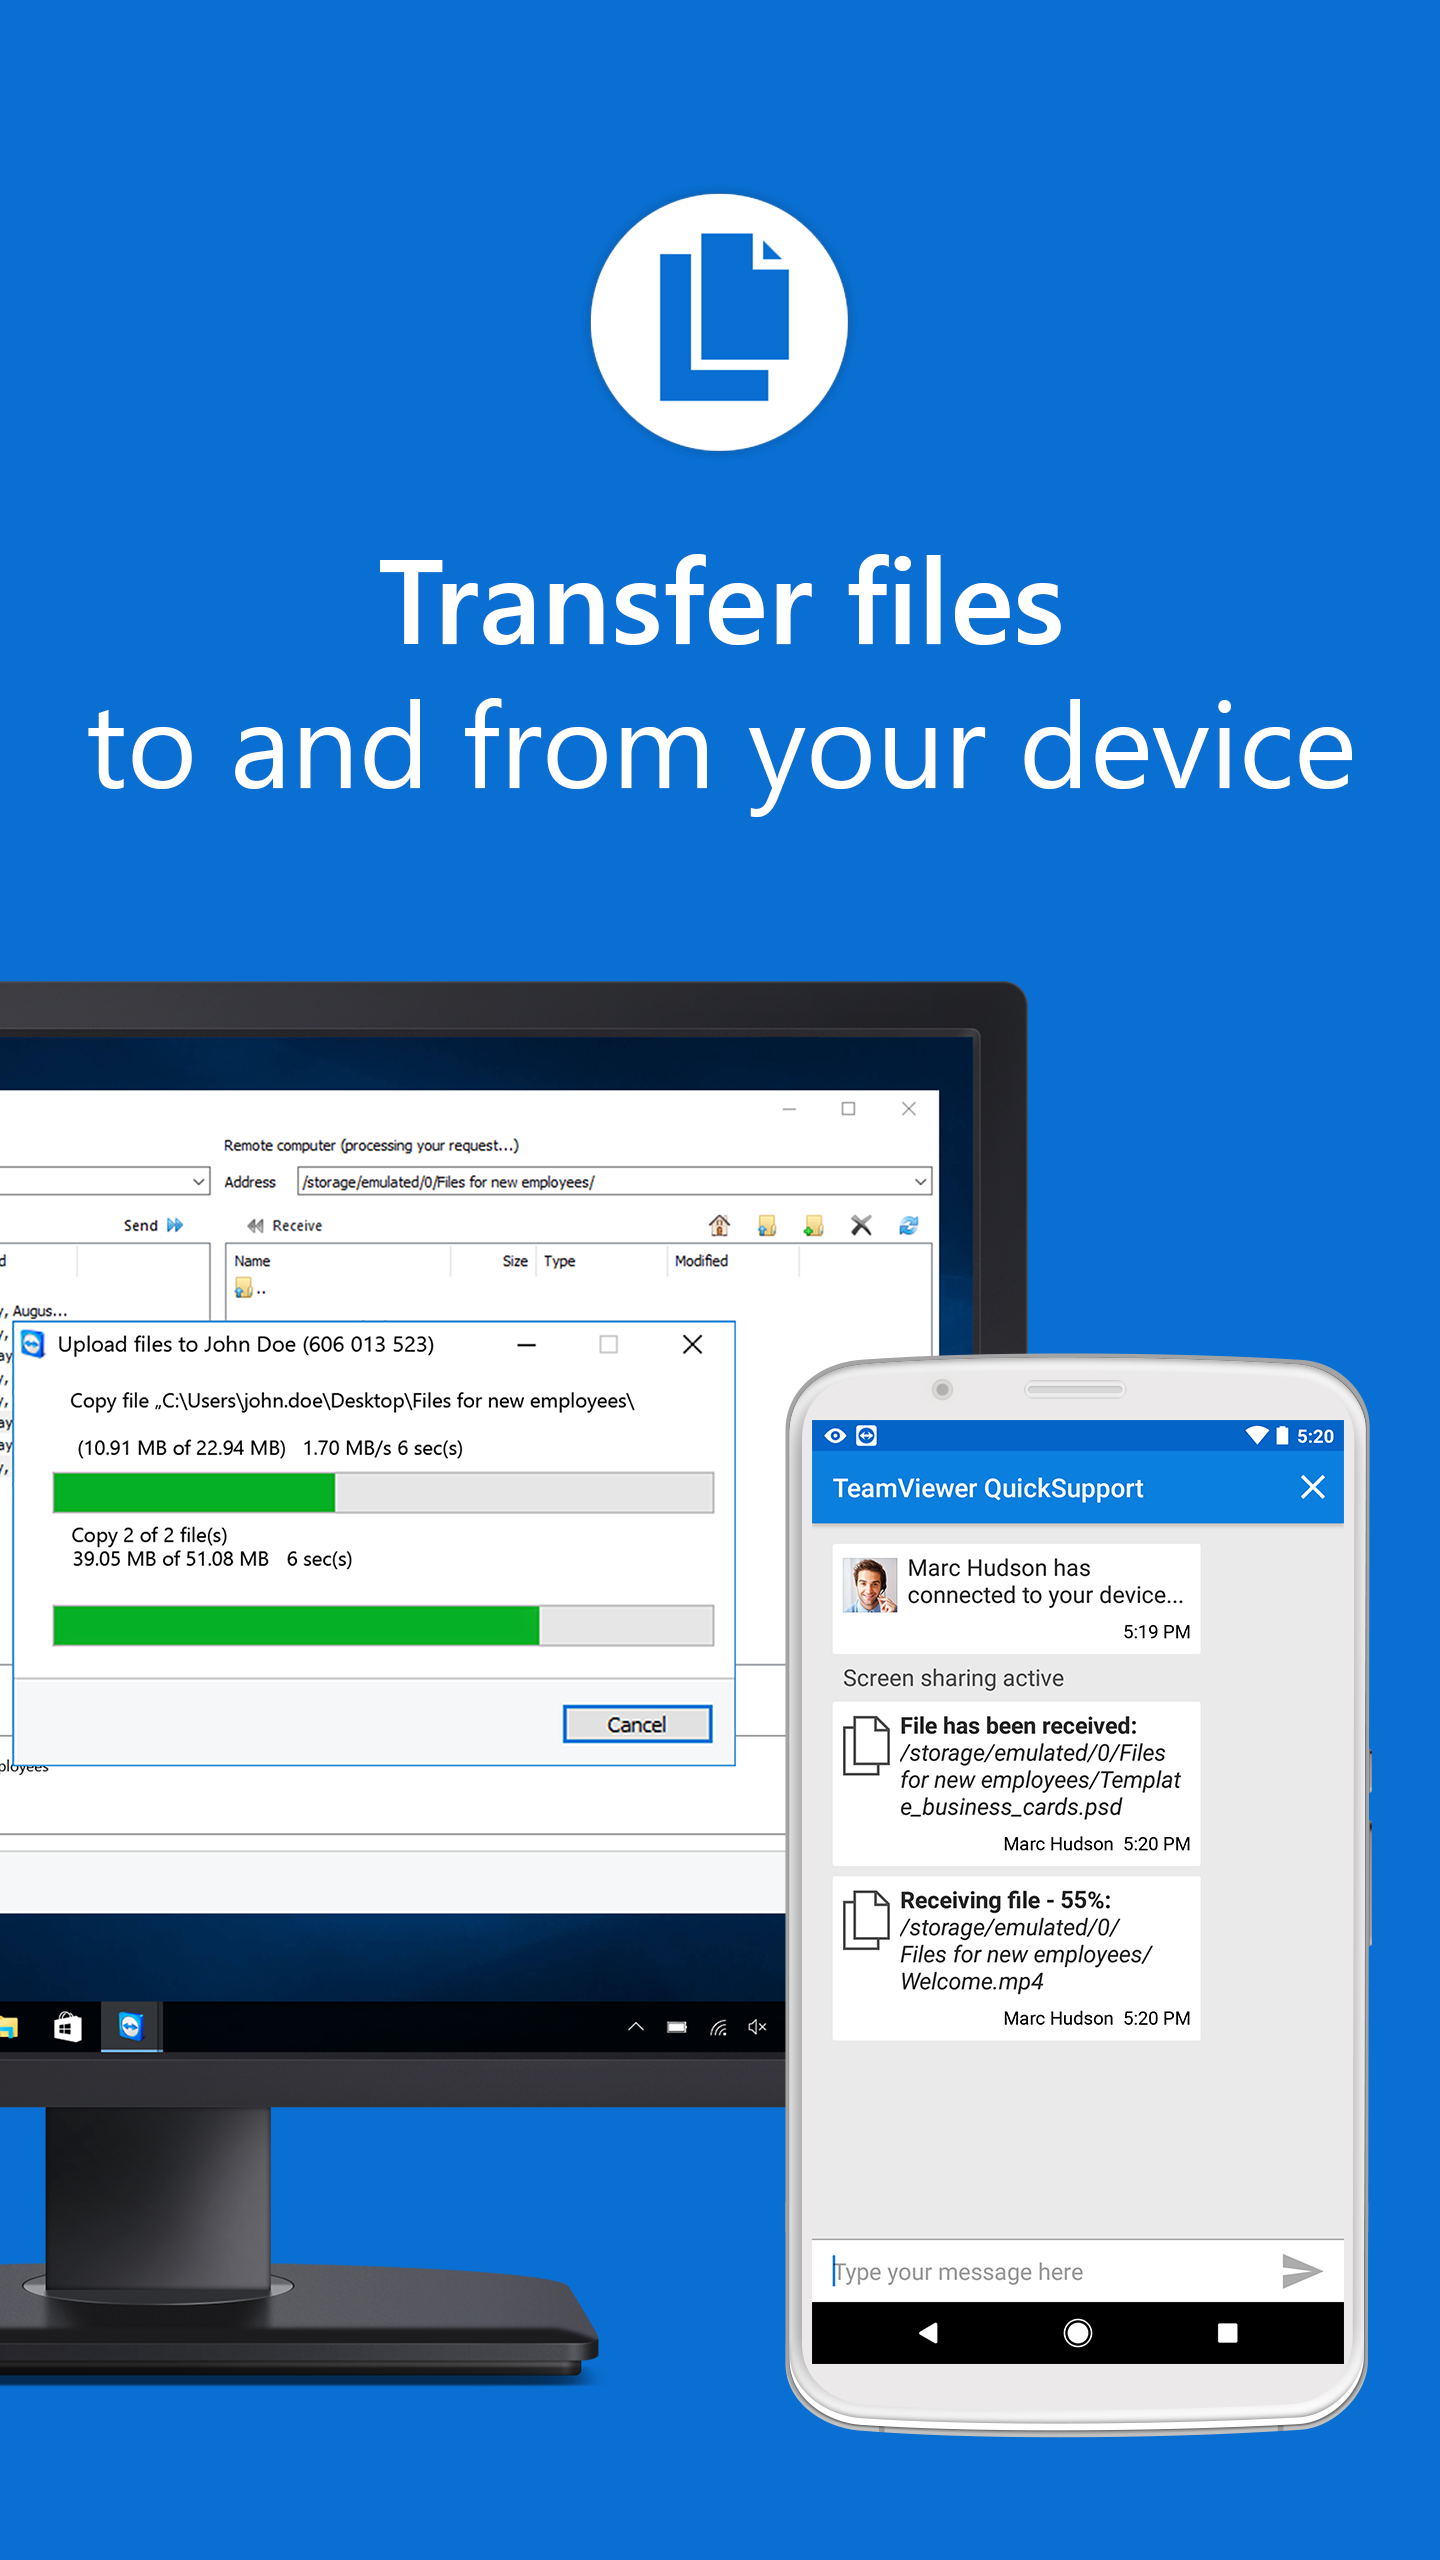 teamviewer mobile device support review